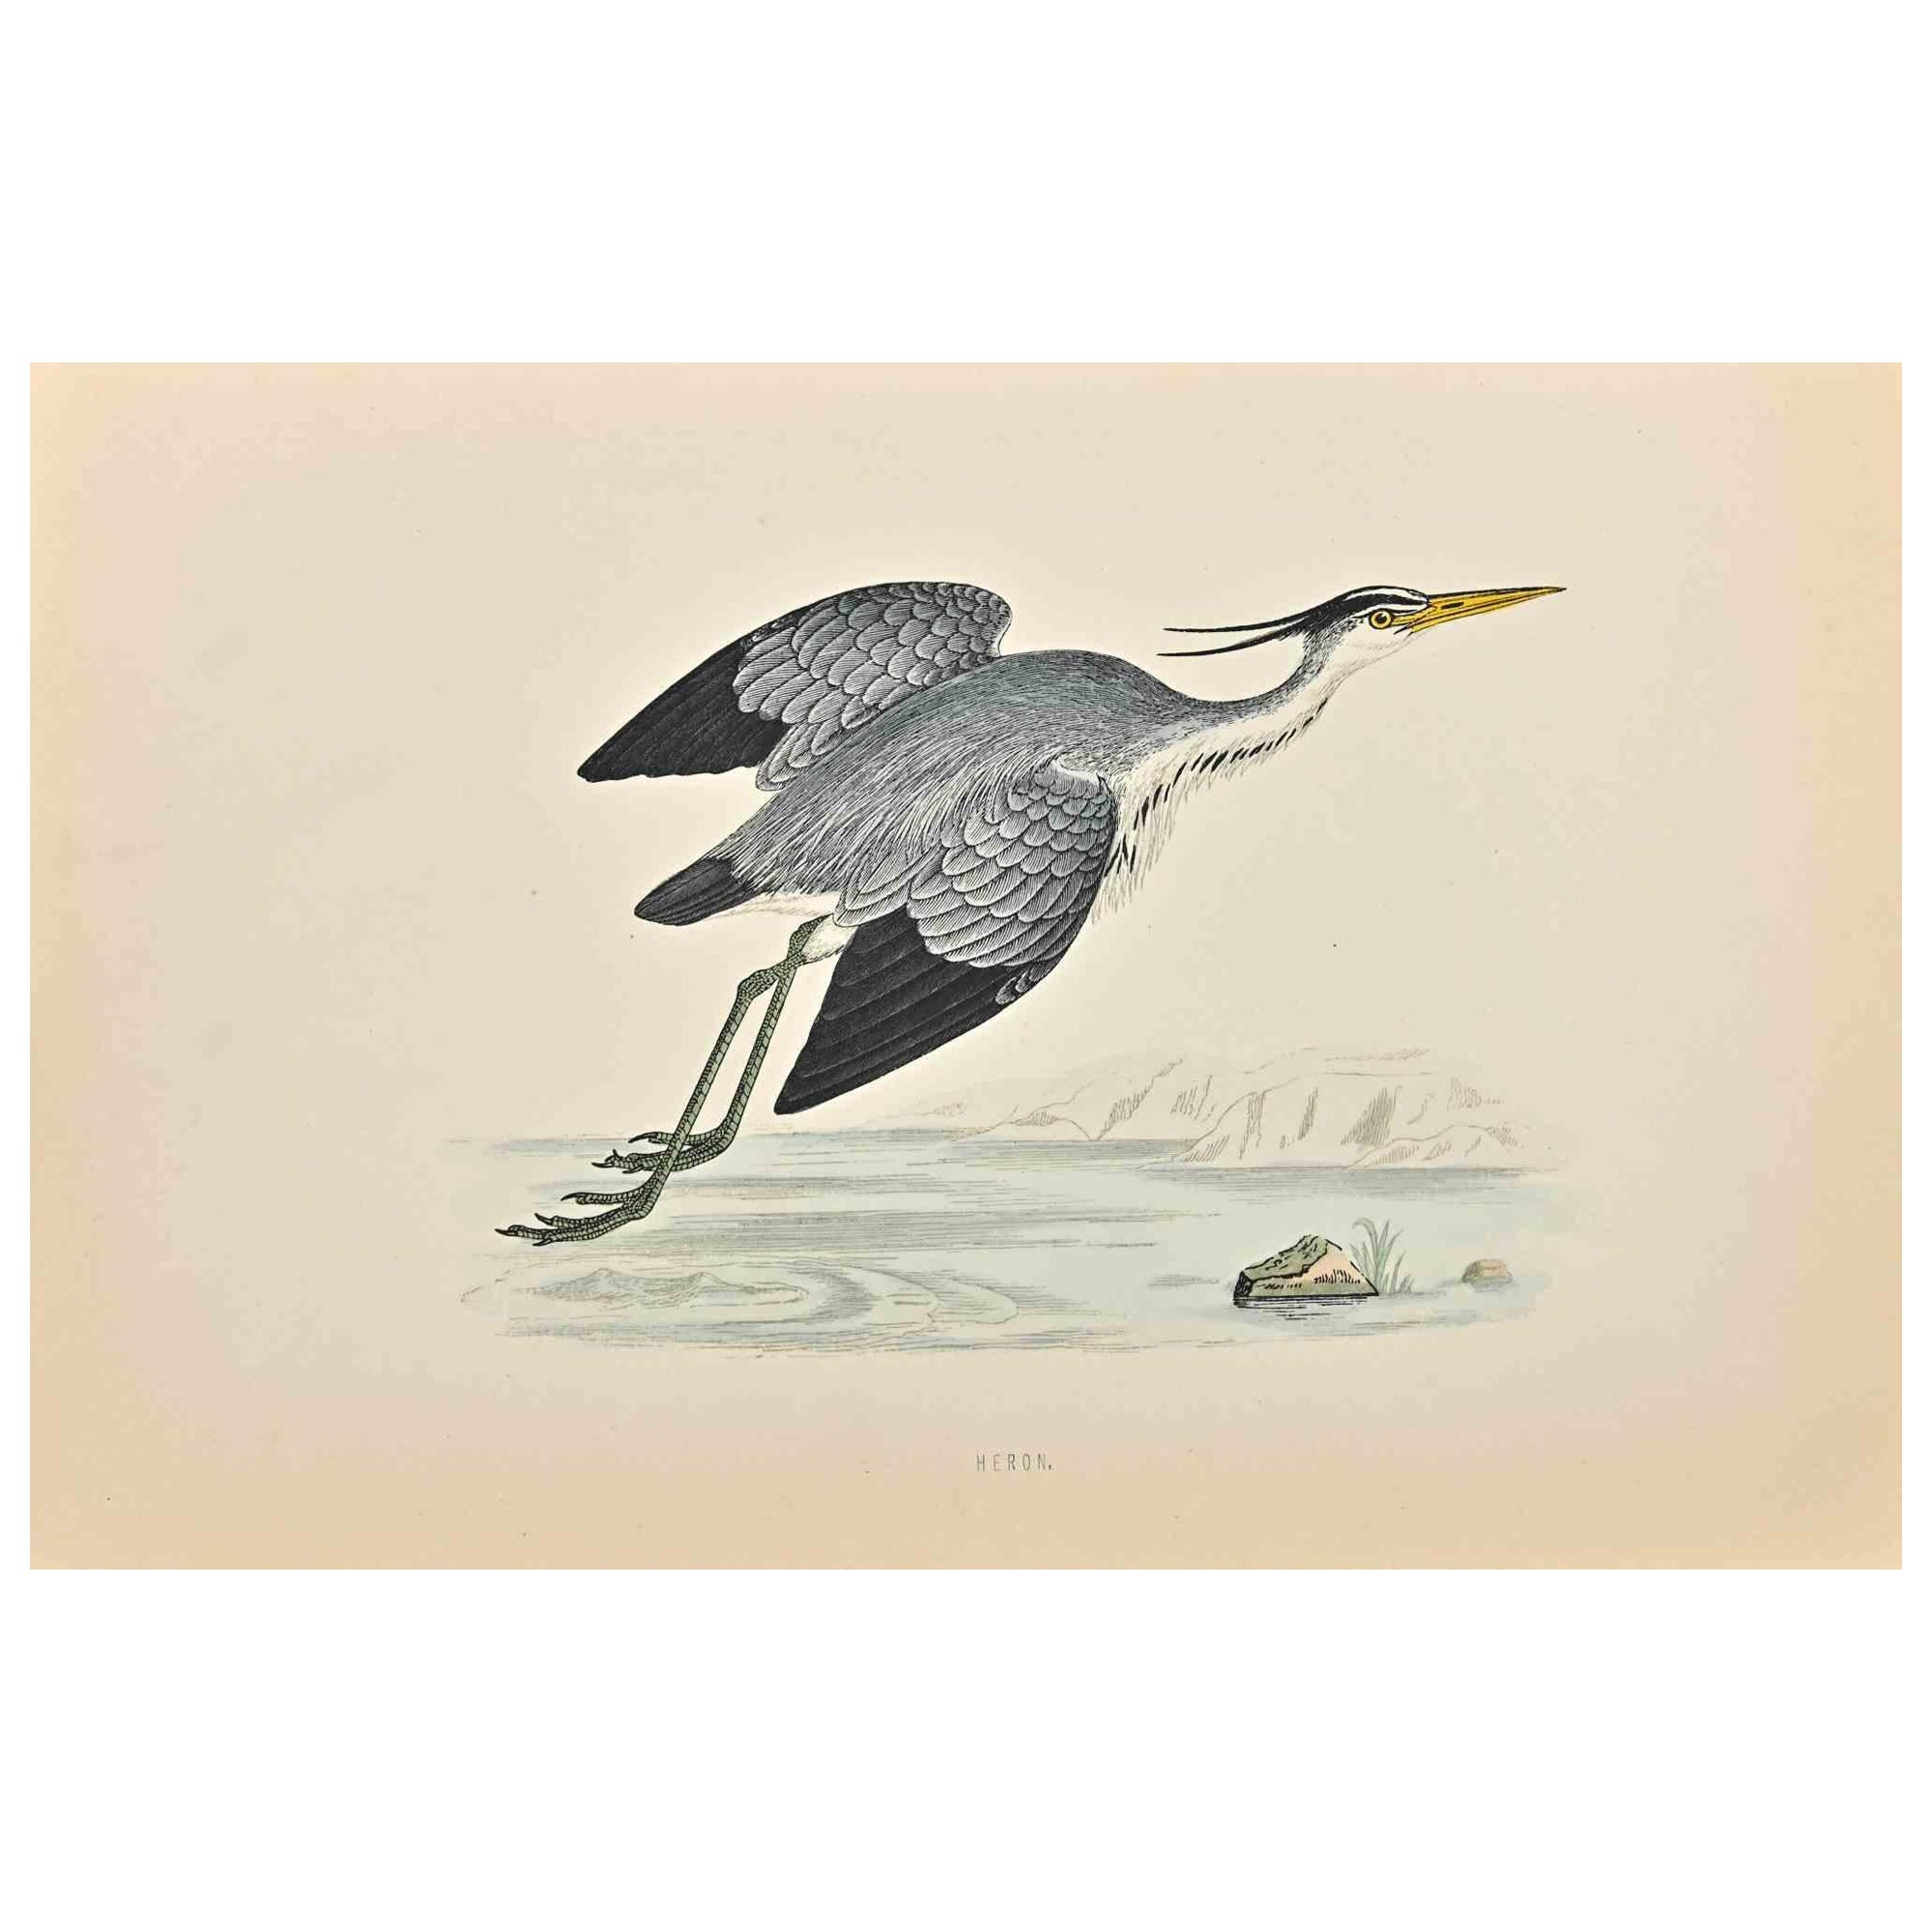 Heron is a modern artwork realized in 1870 by the British artist Alexander Francis Lydon (1836-1917).

Woodcut print on ivory-colored paper.

Hand-colored, published by London, Bell & Sons, 1870.  

The name of the bird is printed on the plate. This